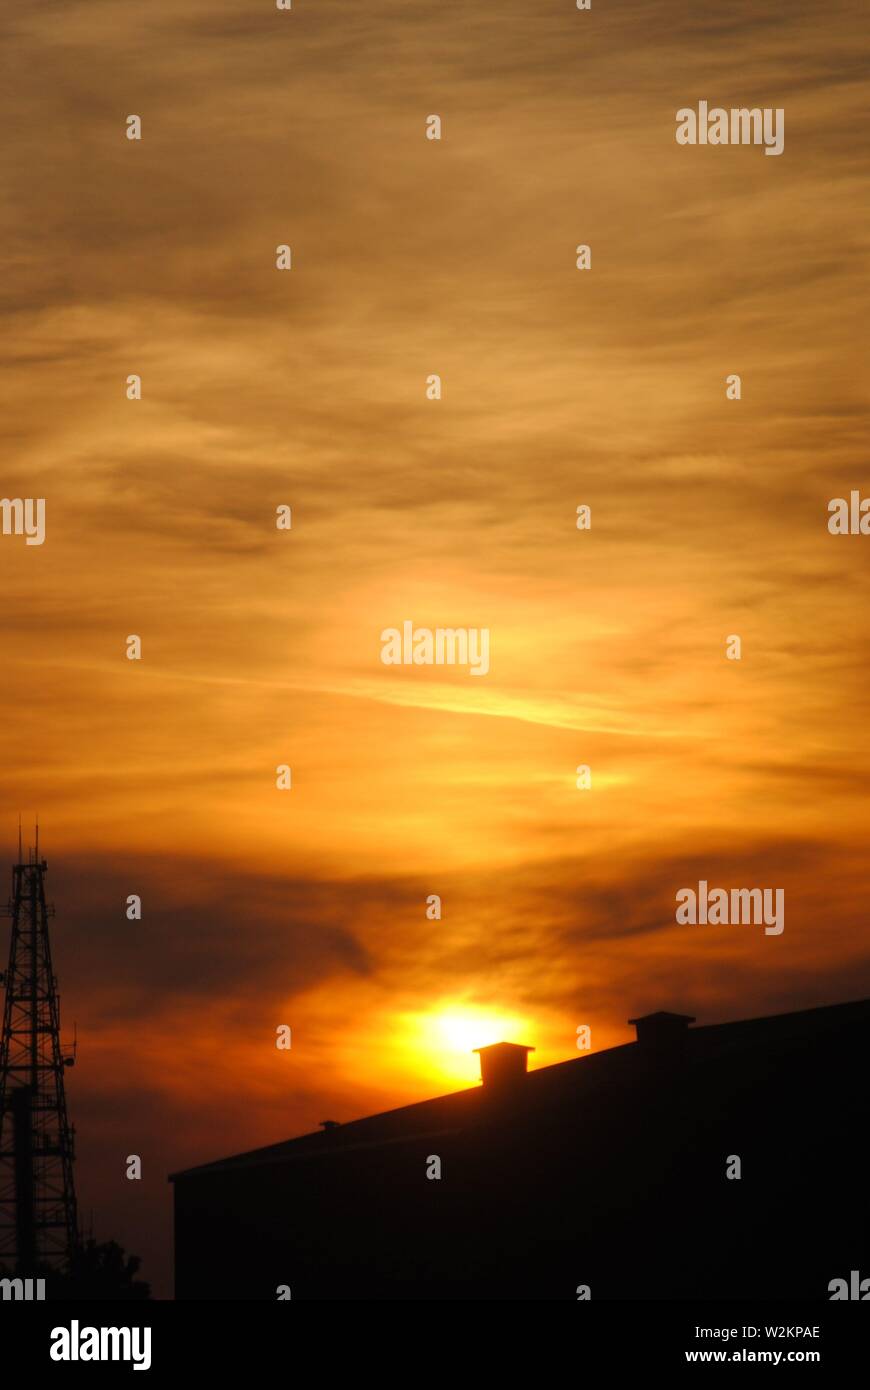 strong orange and yellow natural sunset with silhouette foreground and patterned clouds. Stock Photo